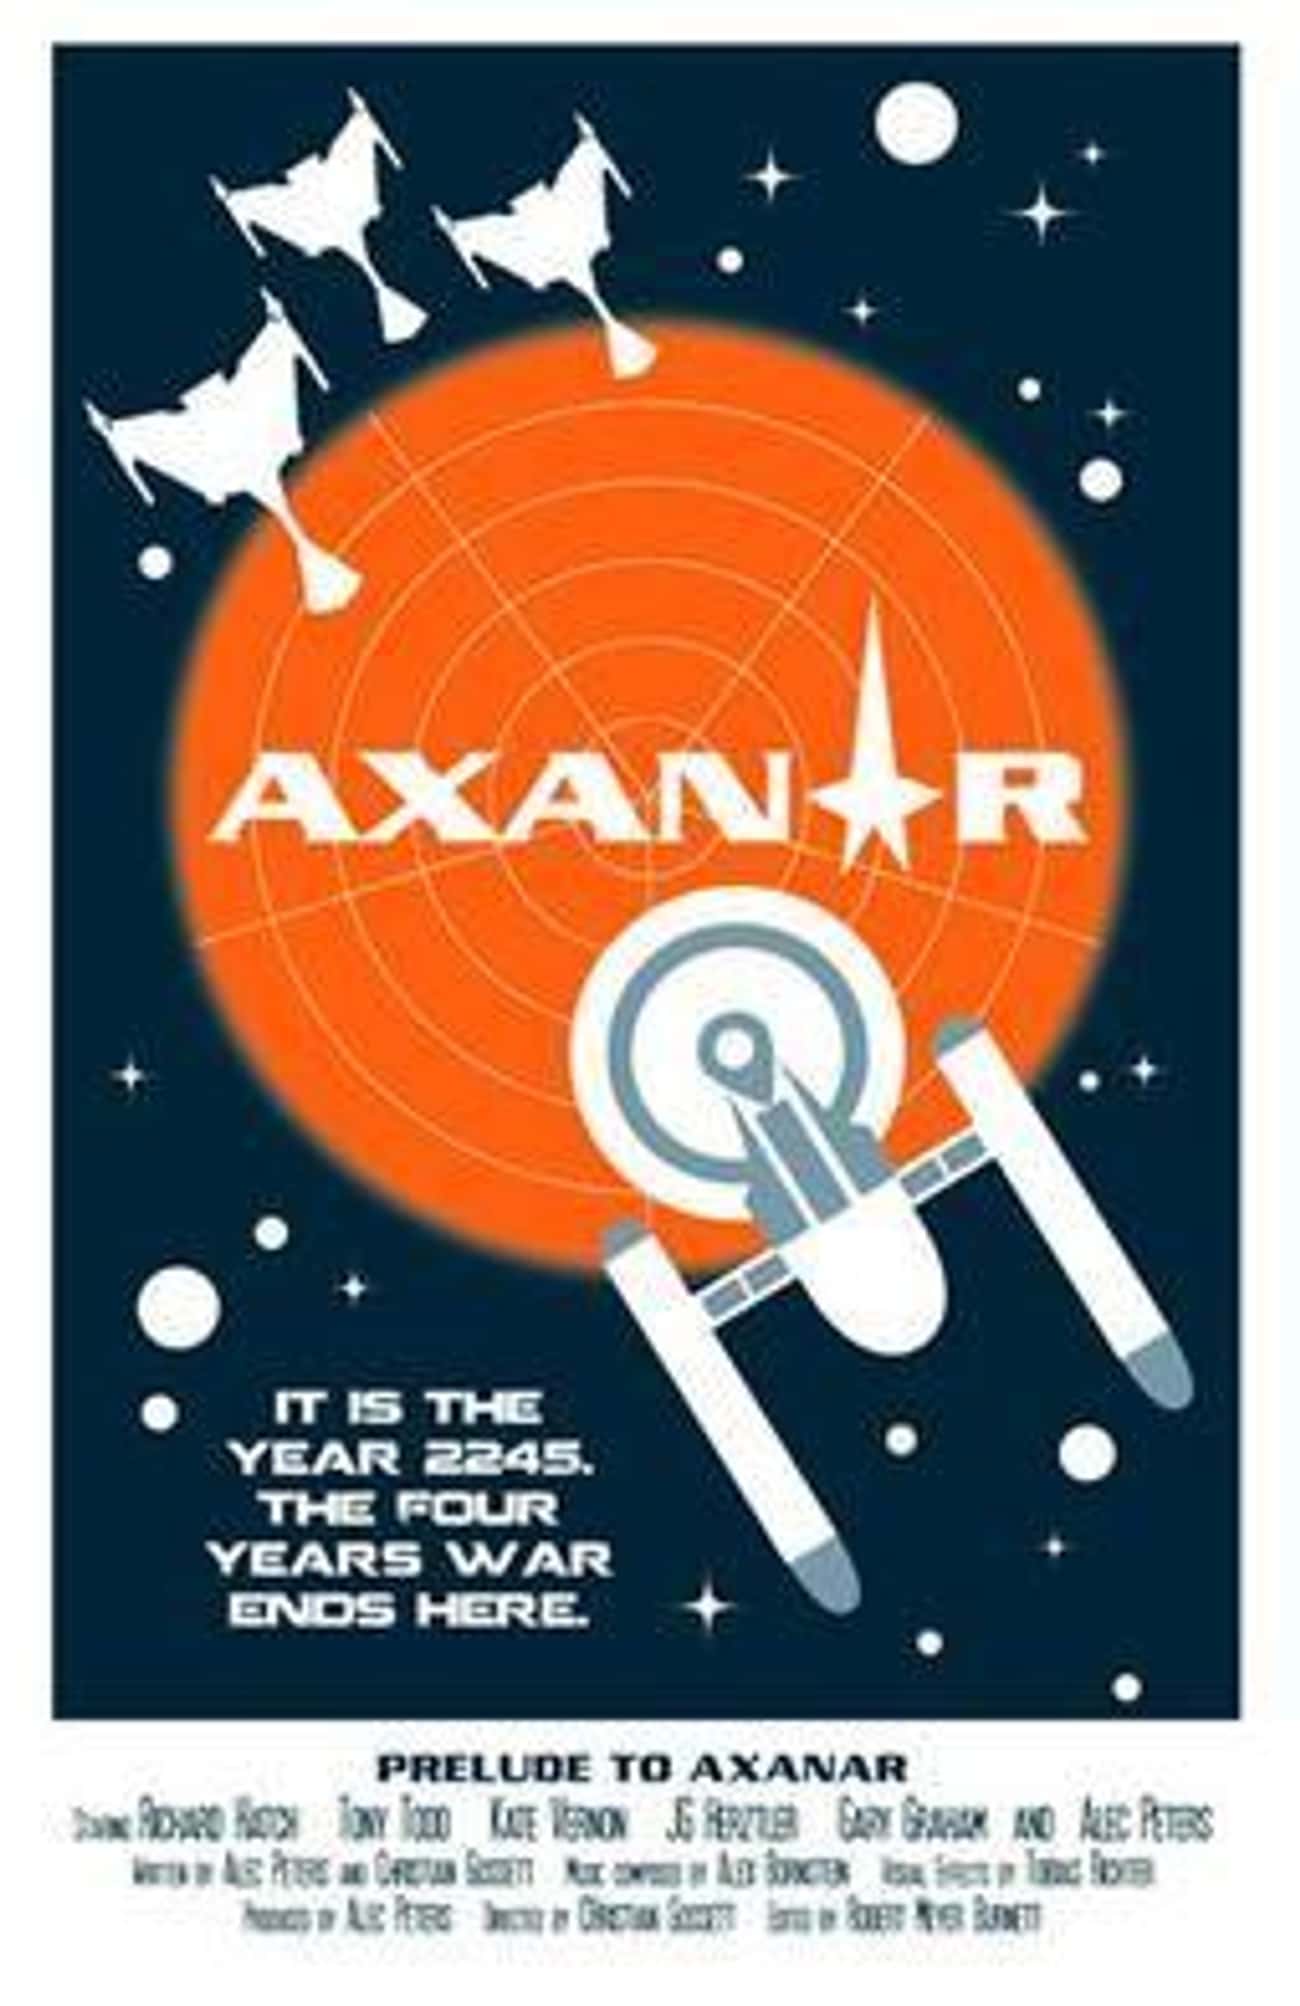 'Prelude to Axanar' Is The Story Of Garth Of Izar During The Conflict Between The Klingons And The Federation